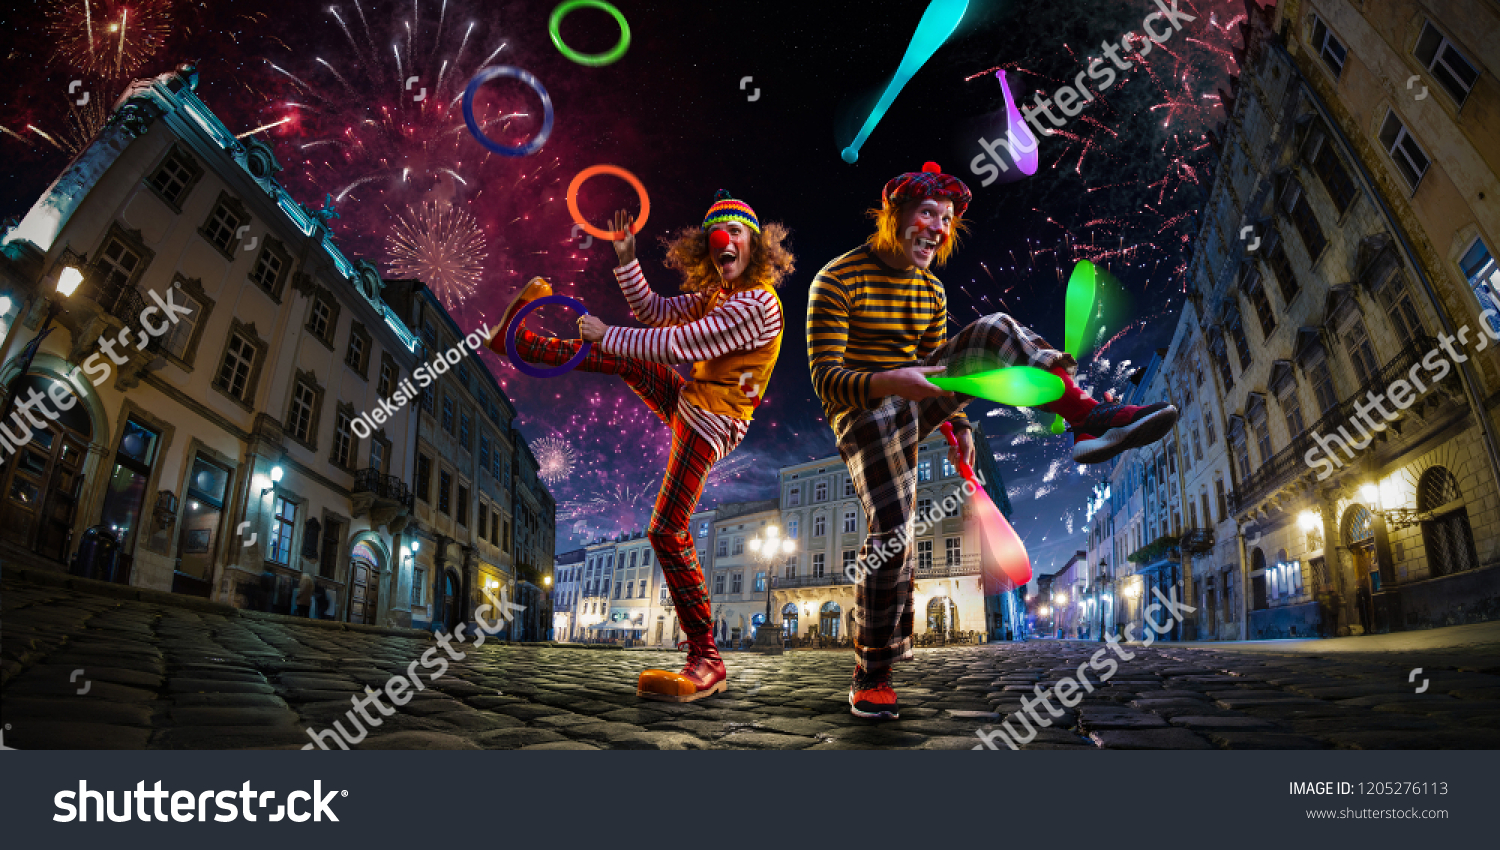 Night street circus performance whit two clowns, juggler. Festival city background. fireworks and Celebration atmosphere. #1205276113